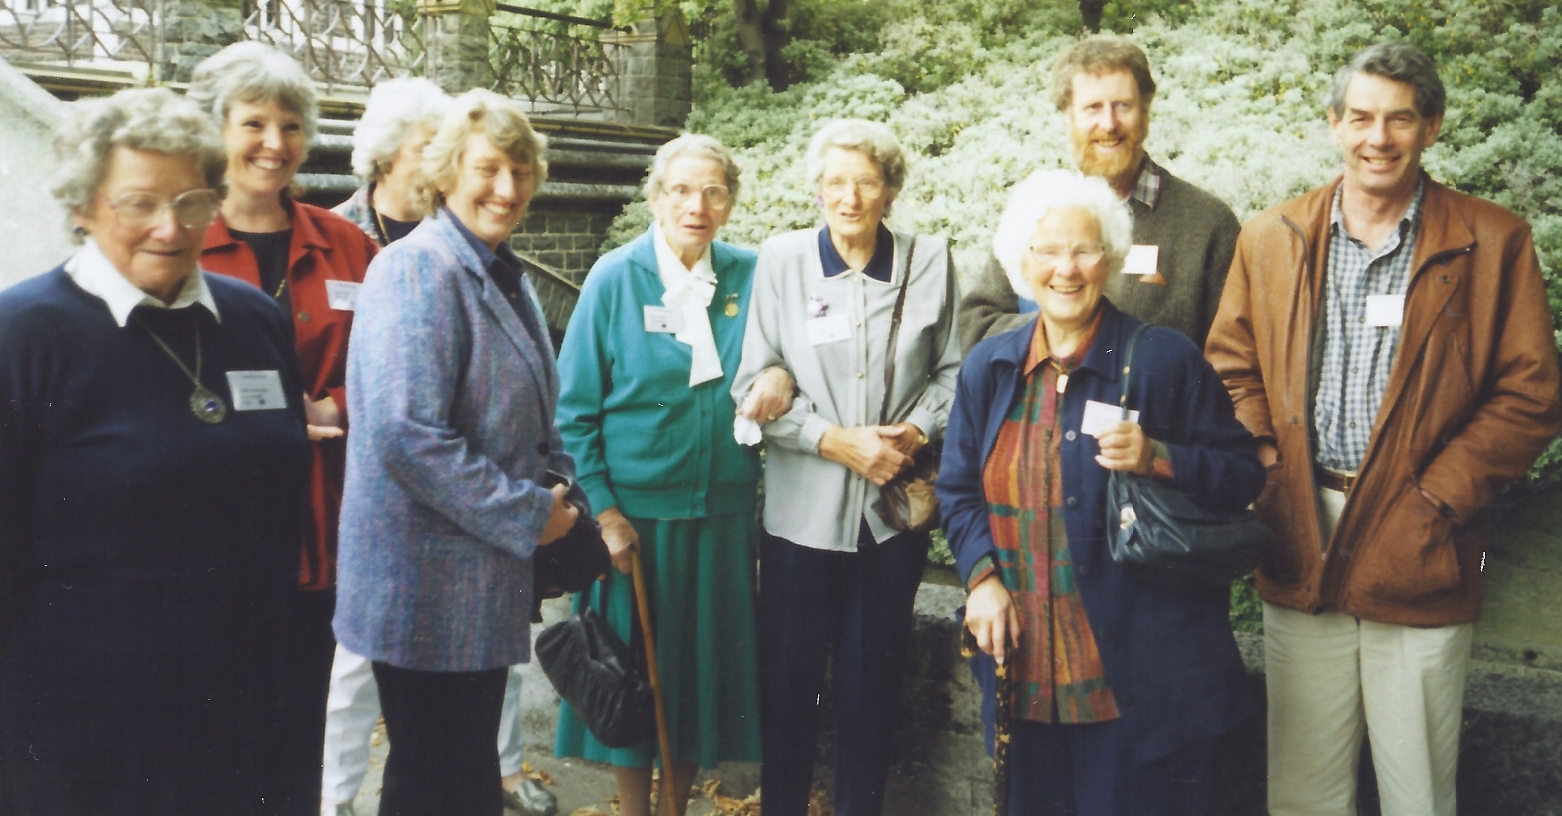 A group of Clearwater cousins at a family reunion, 2006